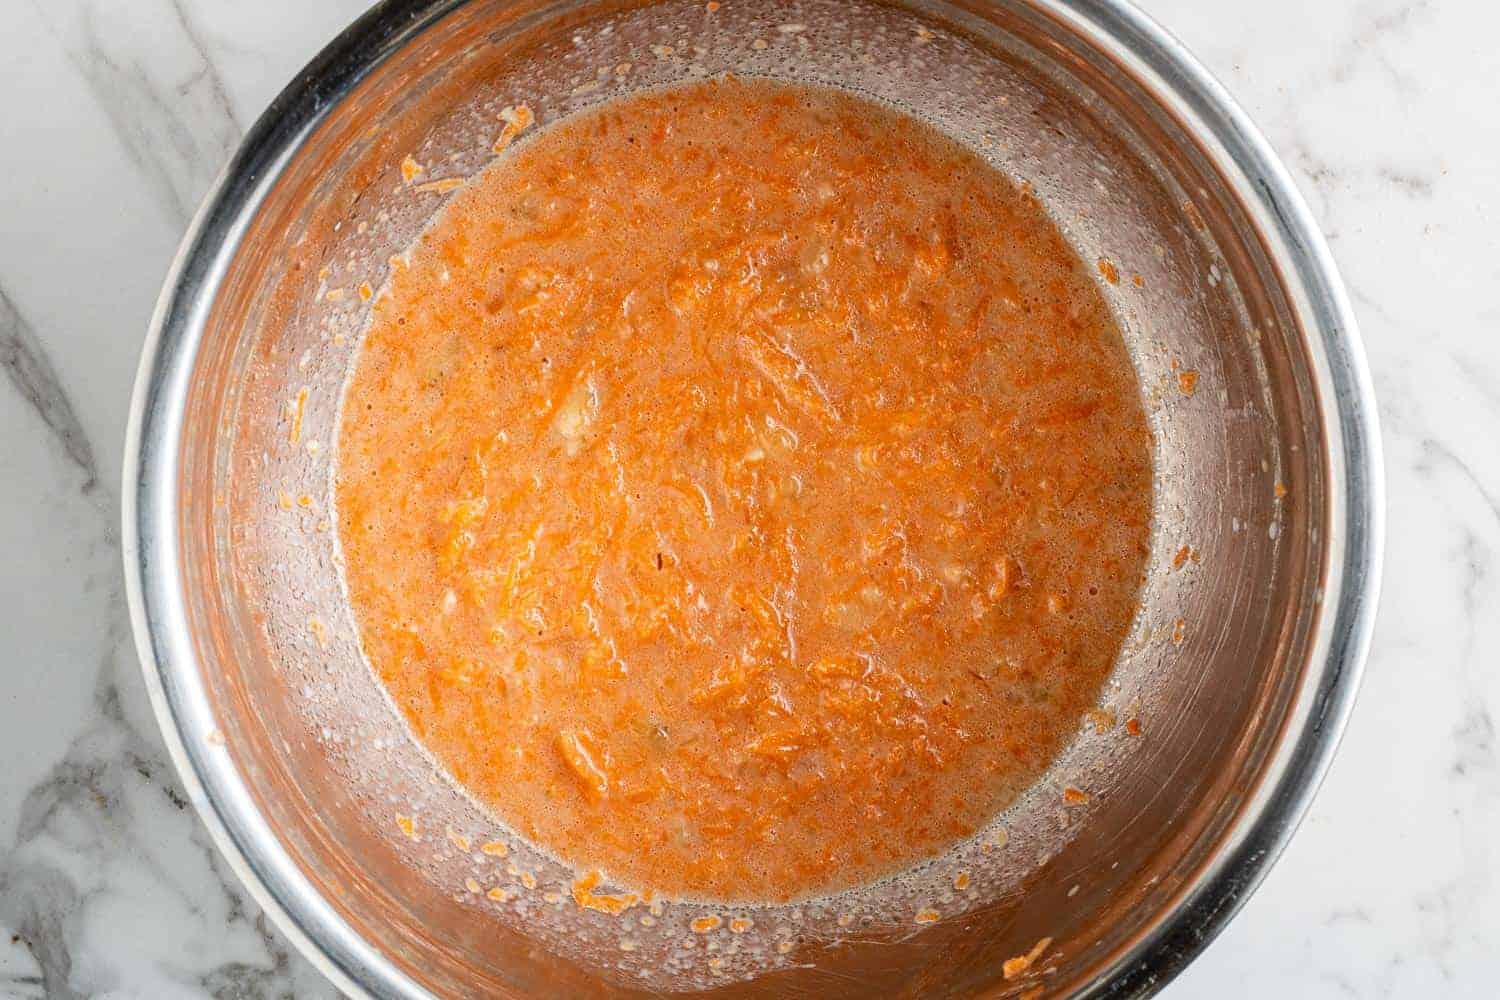 Wet ingredients and carrots in a metal mixing bowl.